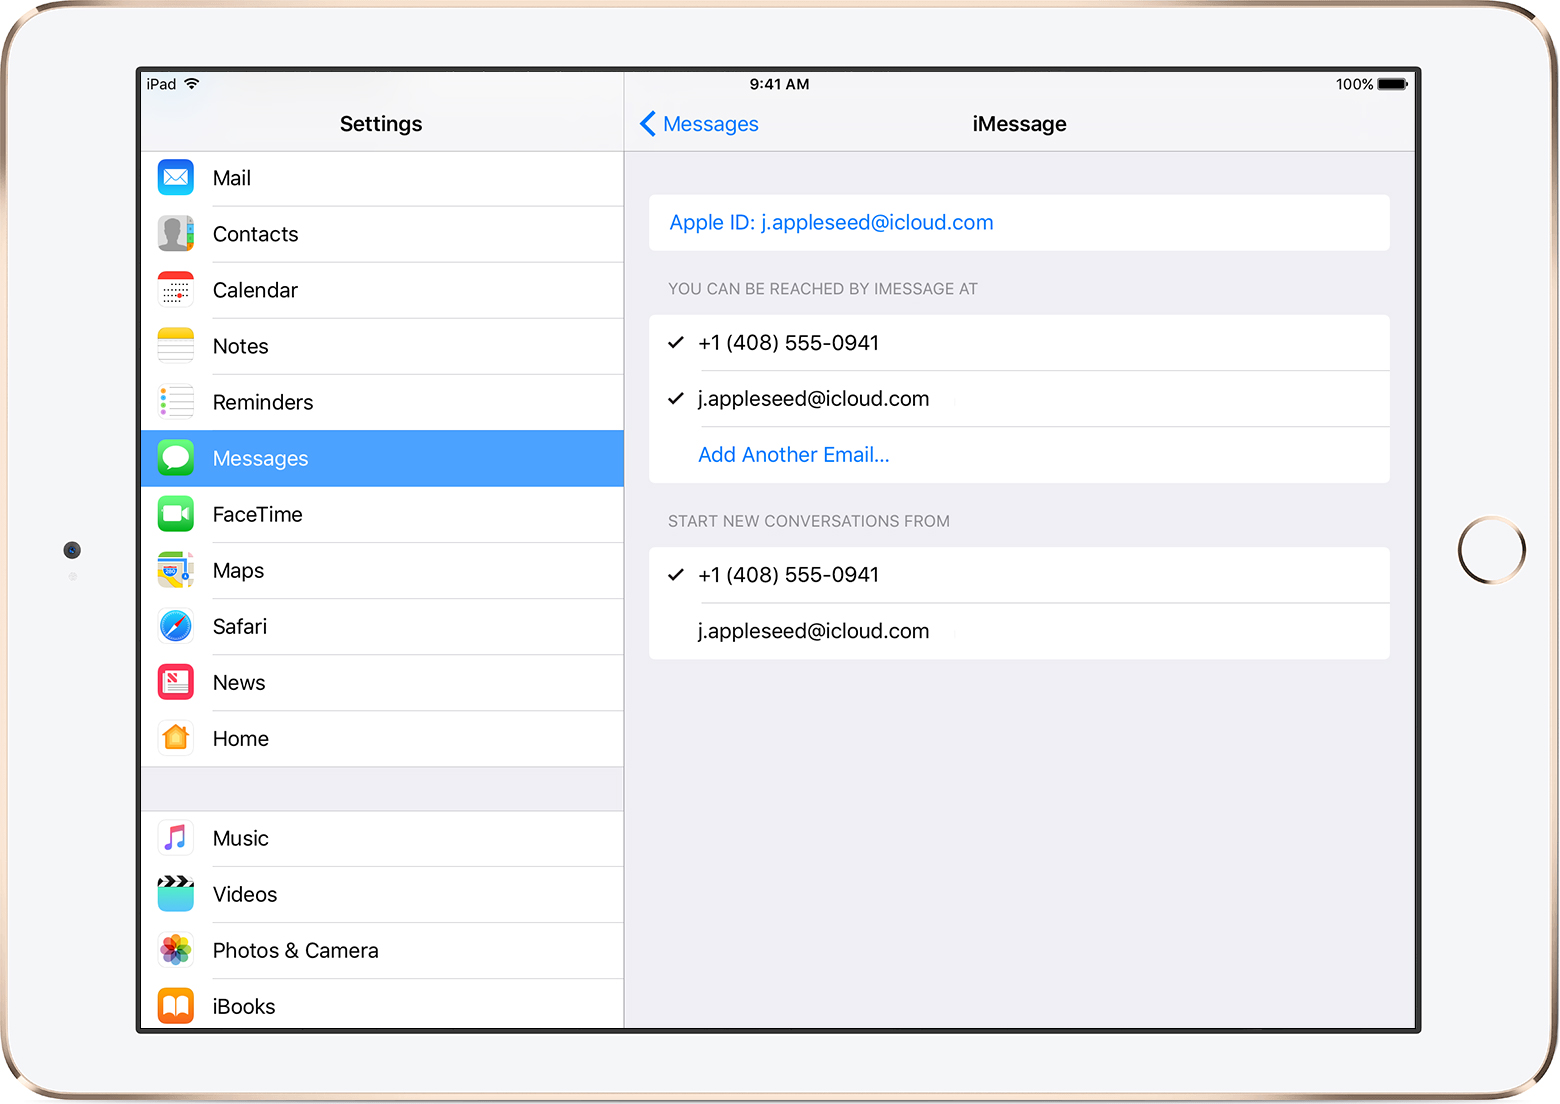 how to receive messages on ipad with phone number